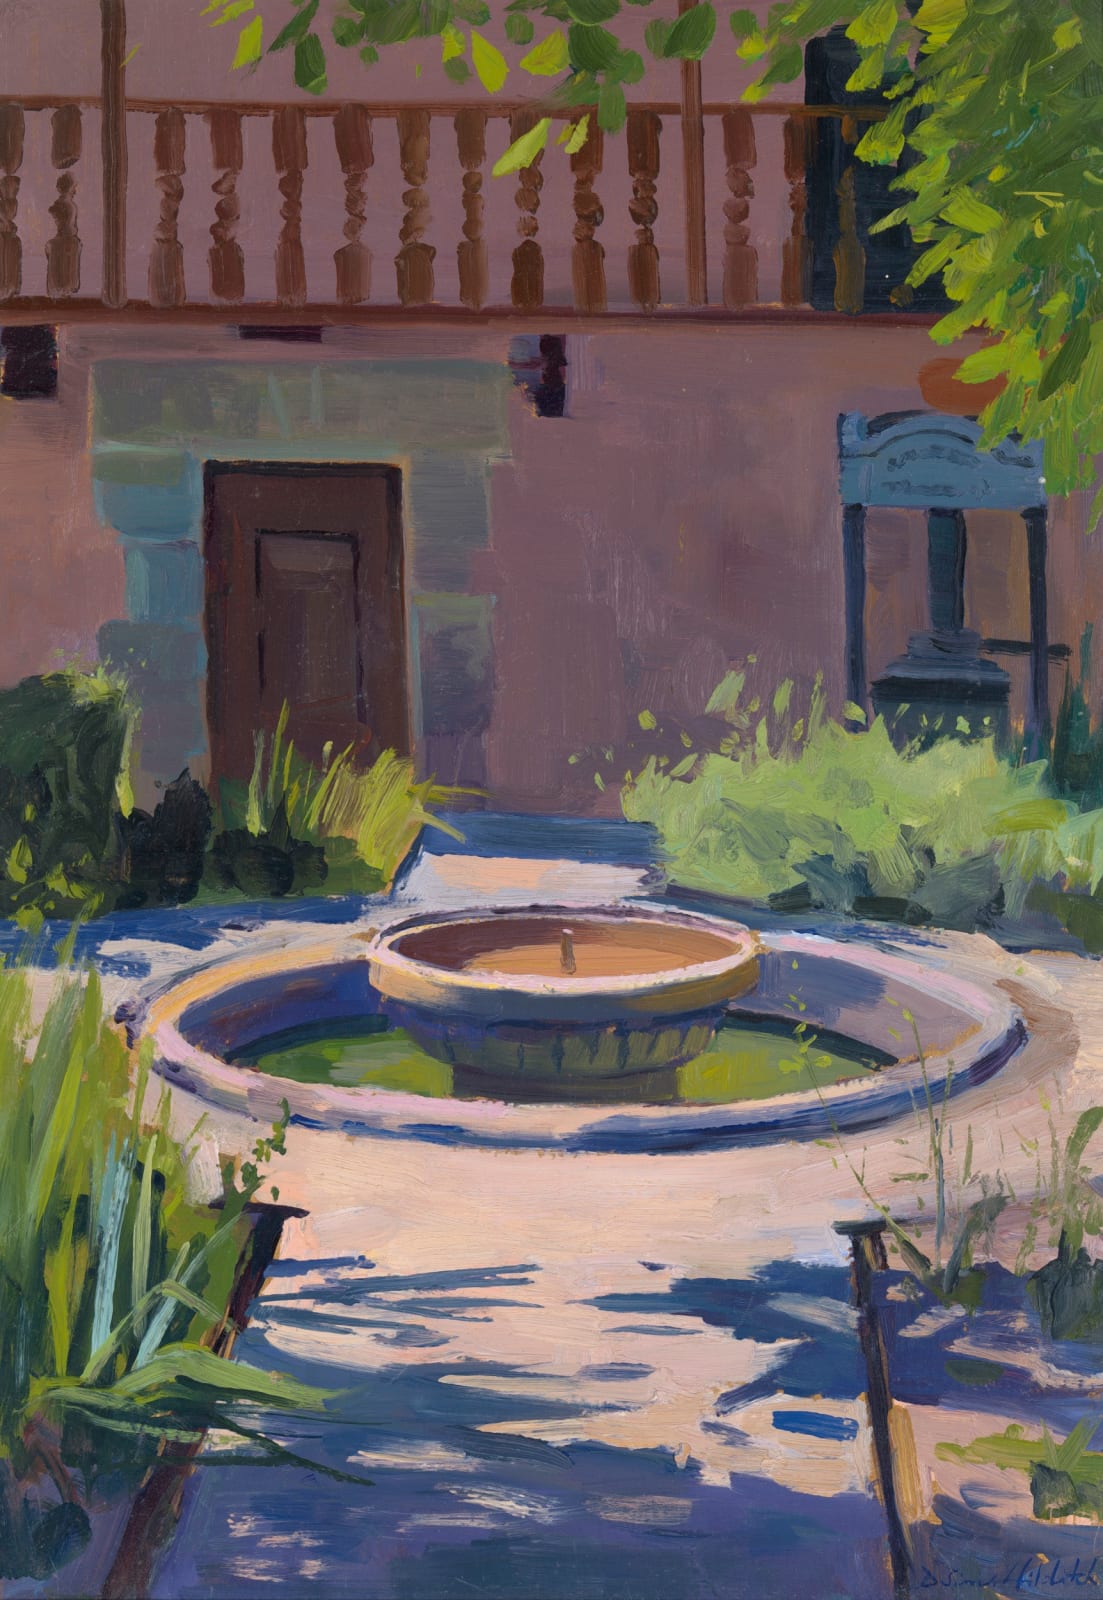 Daisy Sims Hilditch, Afternoon dappled light by the pond, Bellosguardo, 2022